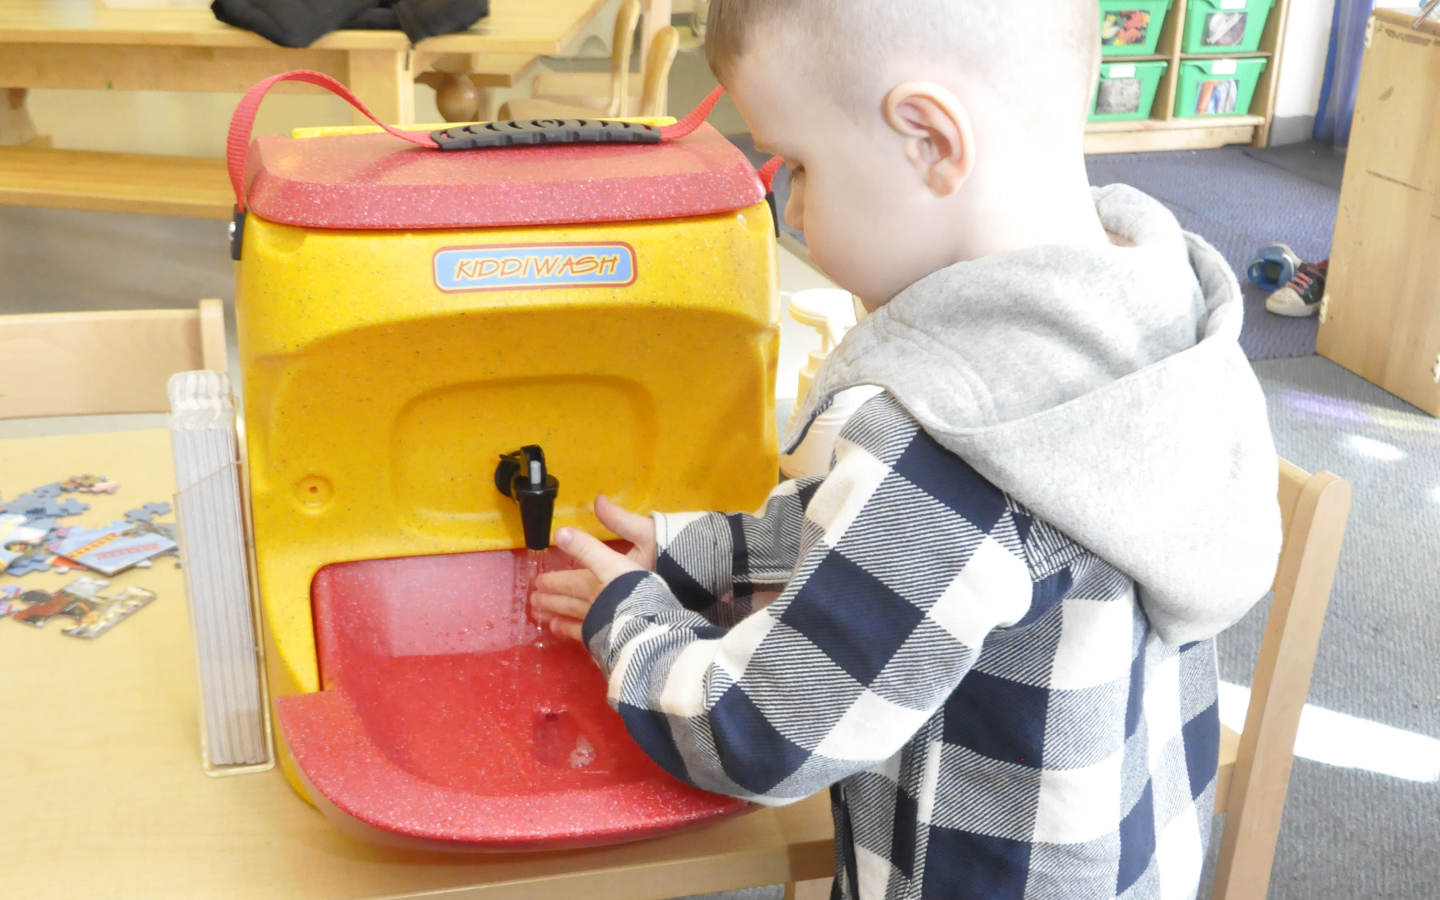 A youngster washing hands with a KiddiWash Xtra unit